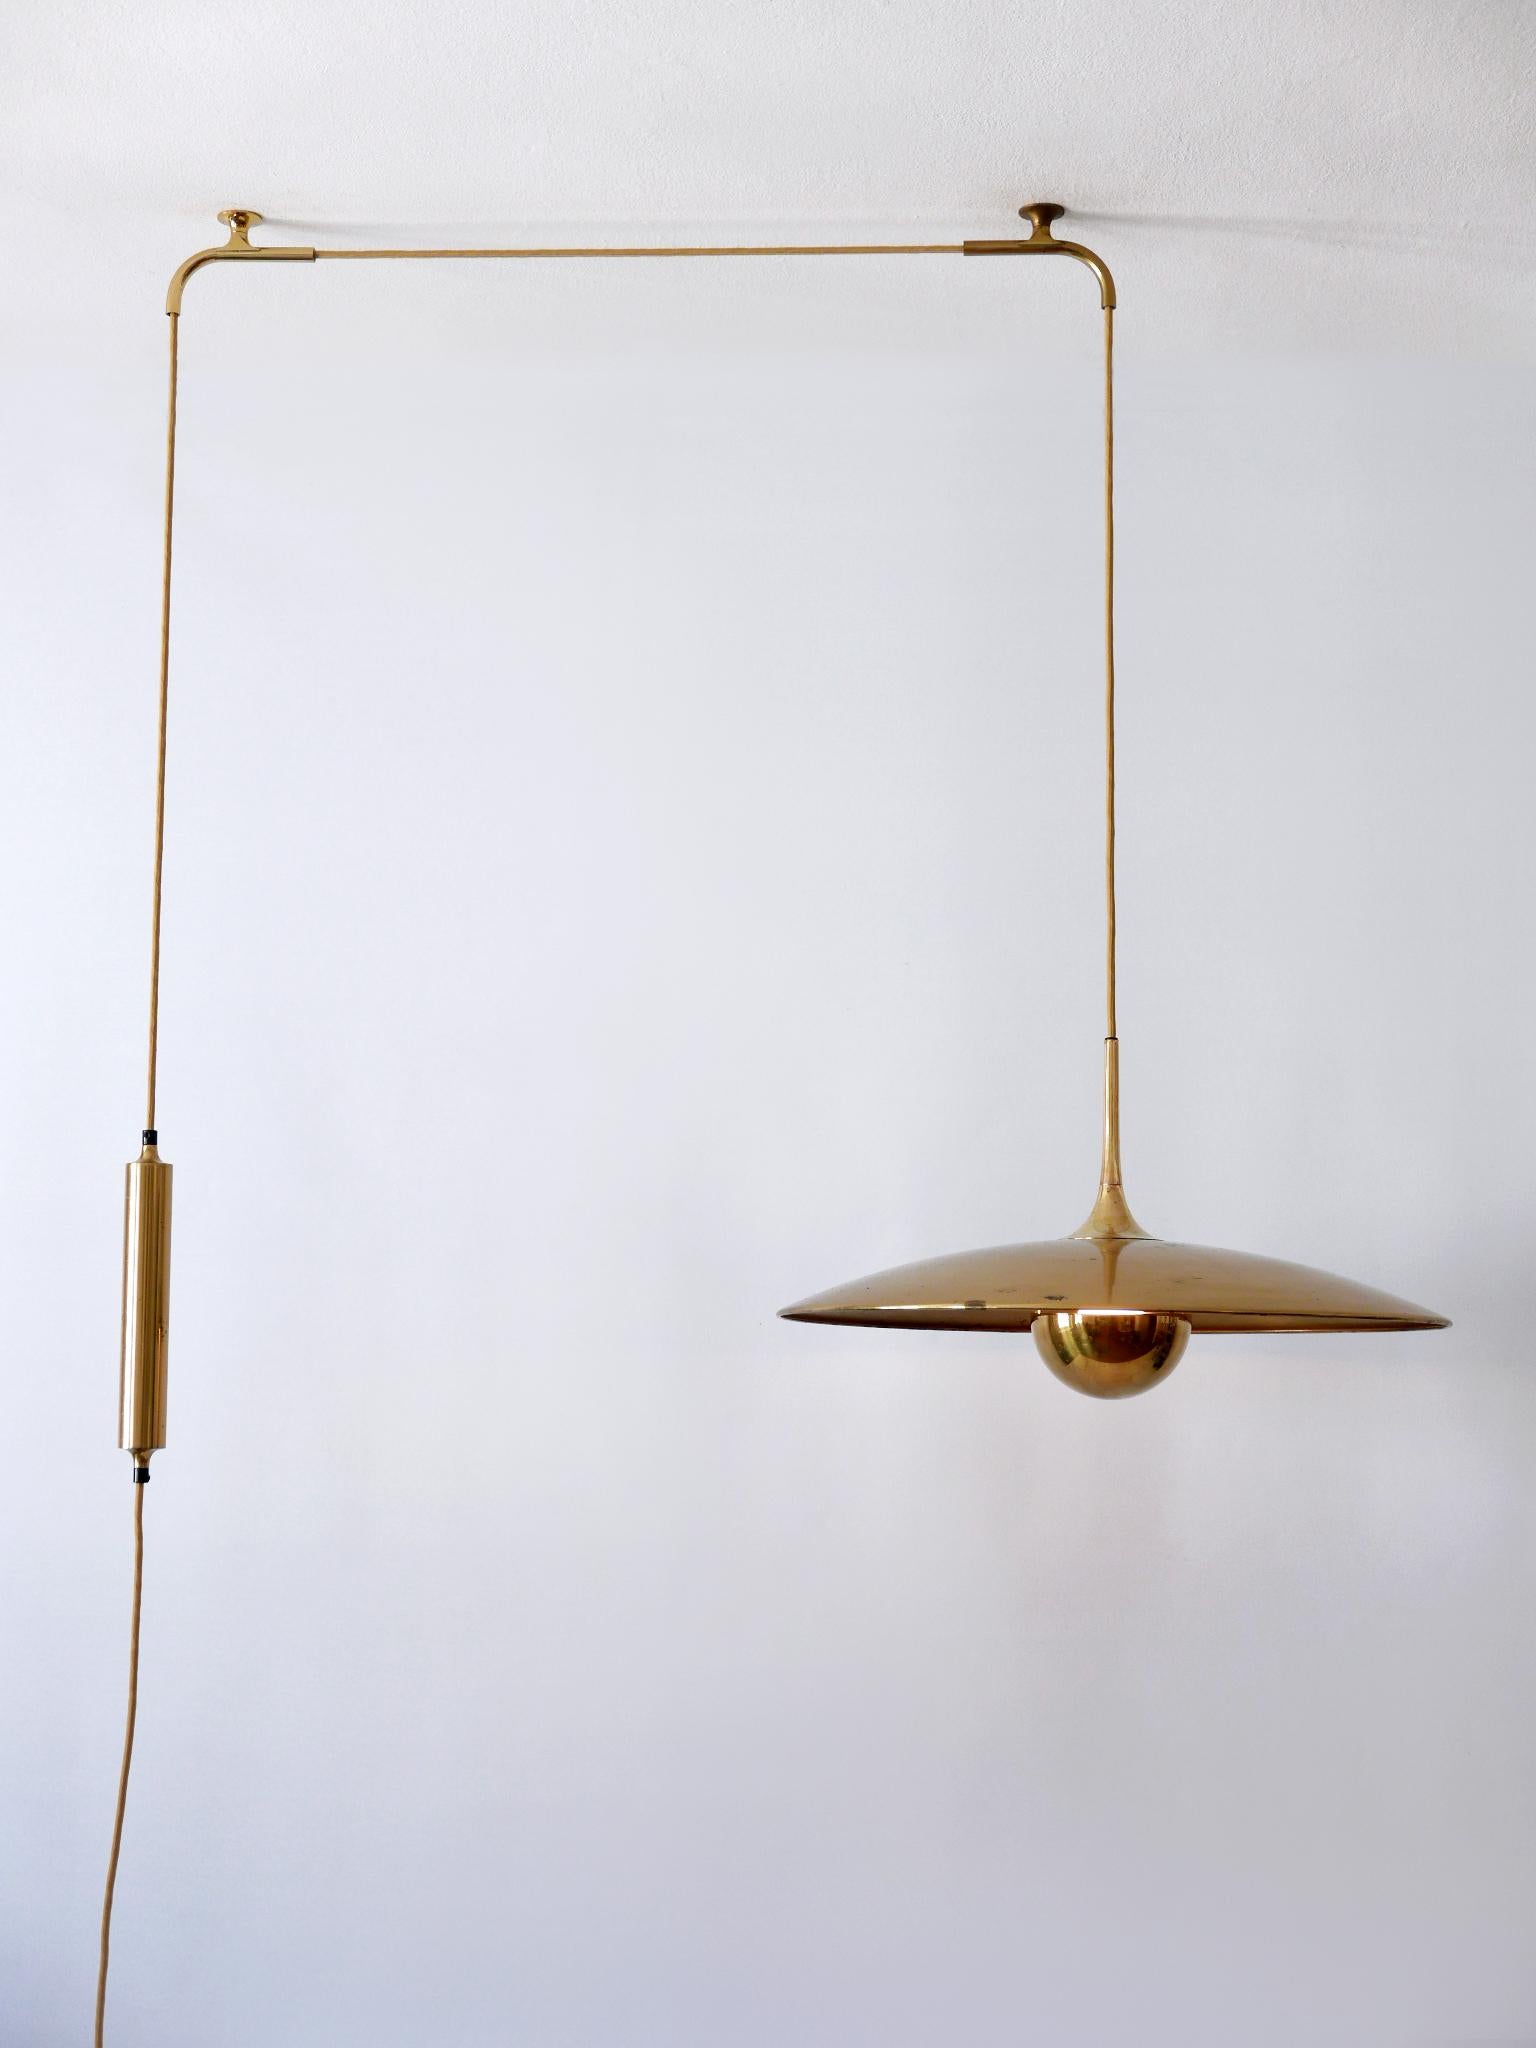 Extremely rare early brass counterweight pendant lamp or hanging light. Model Onos 55. Designed and manufactured by Florian Schulz, 1960s, Germany.

Executed in solid brass, the lamp comes with 1 x E27 Edison screw fit bulb holder, is wired and in